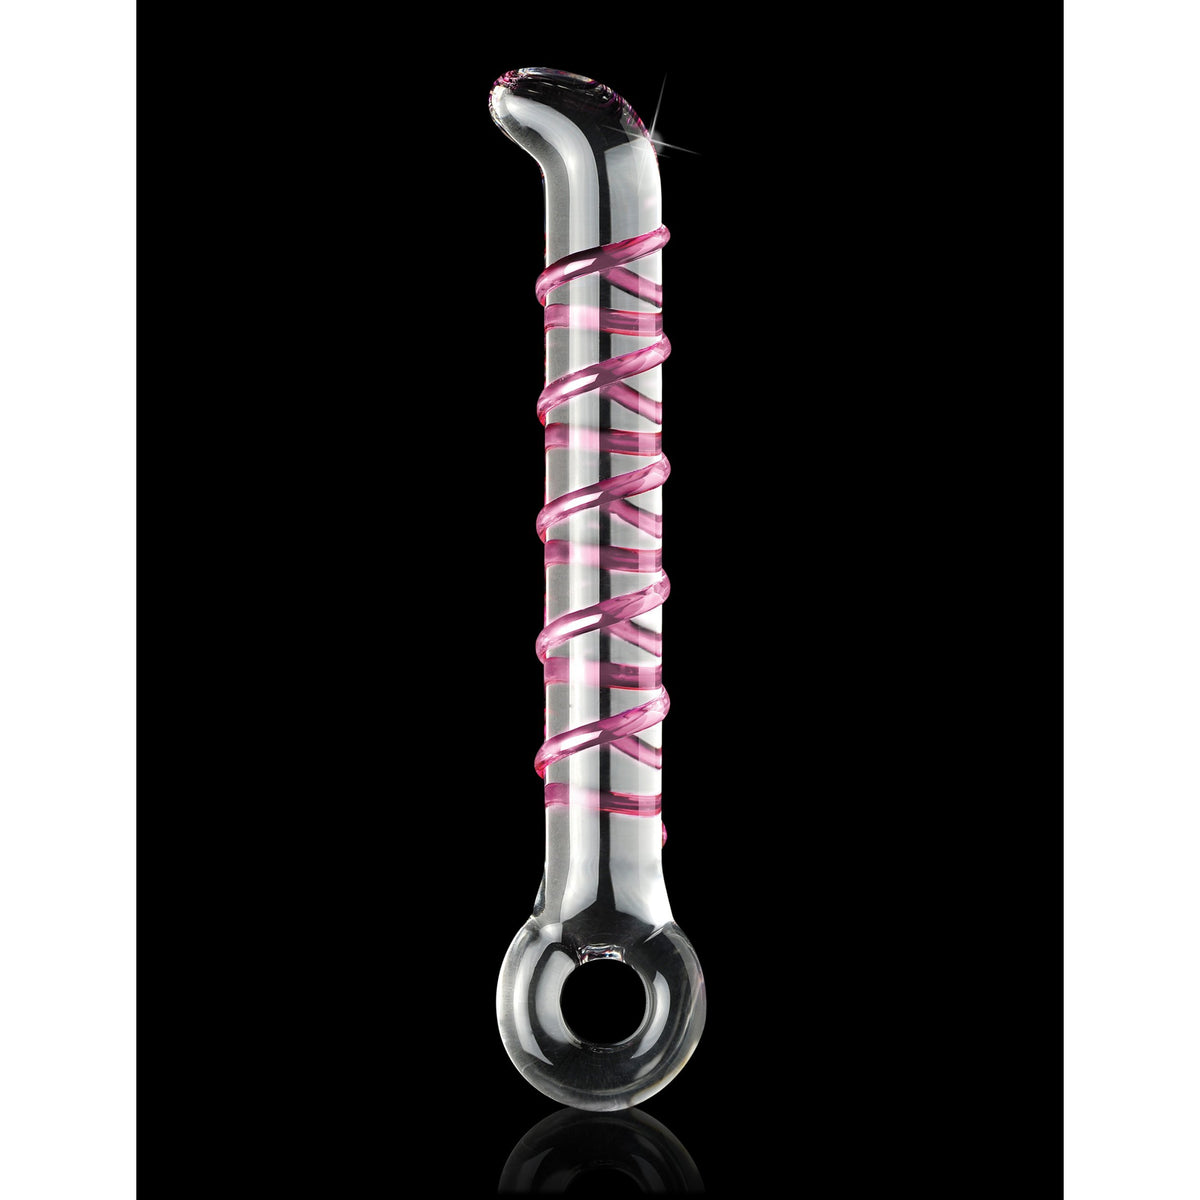 Pipedream - Icicles No. 4 Glass Vibrator 7&quot; (Clear) PD1163 CherryAffairs